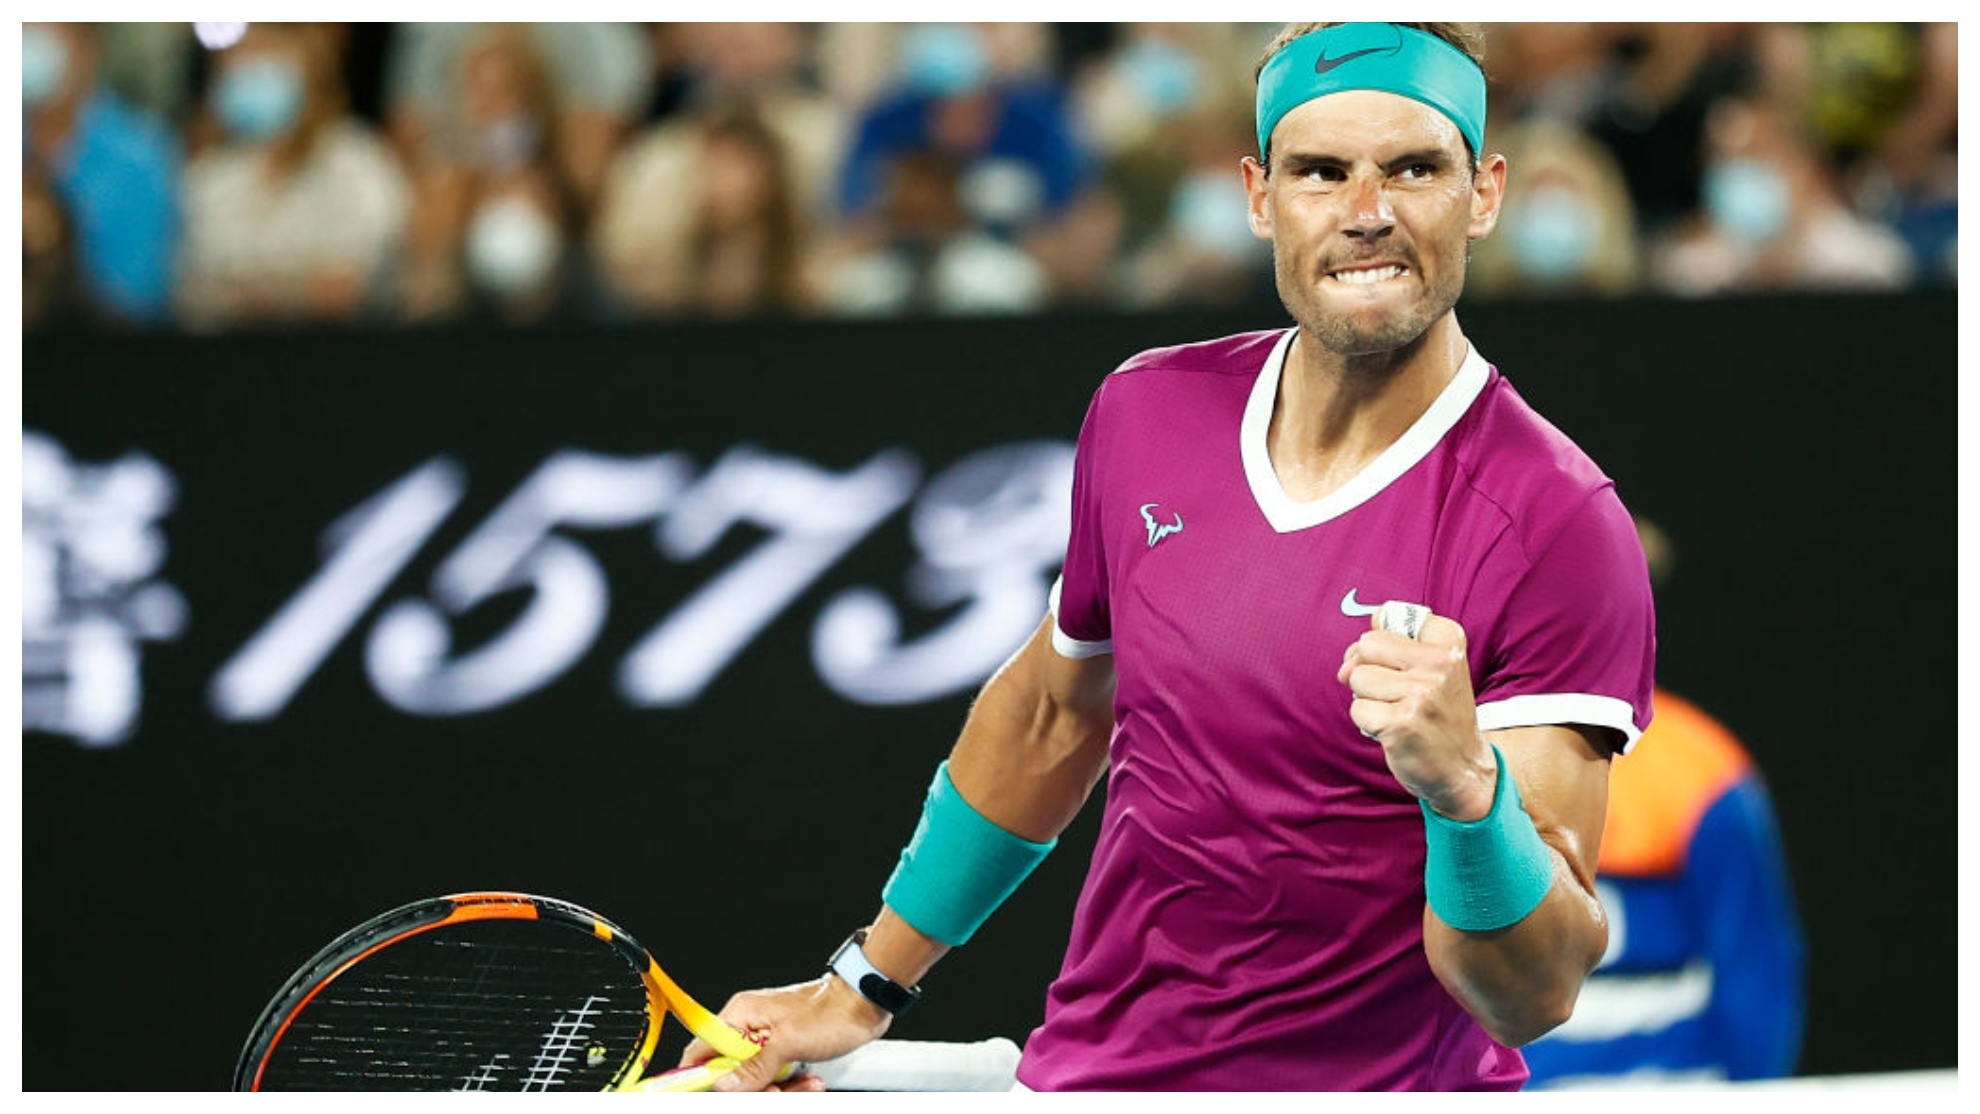 Rafael Nadal has advanced to the fourth round of the Australian Open.